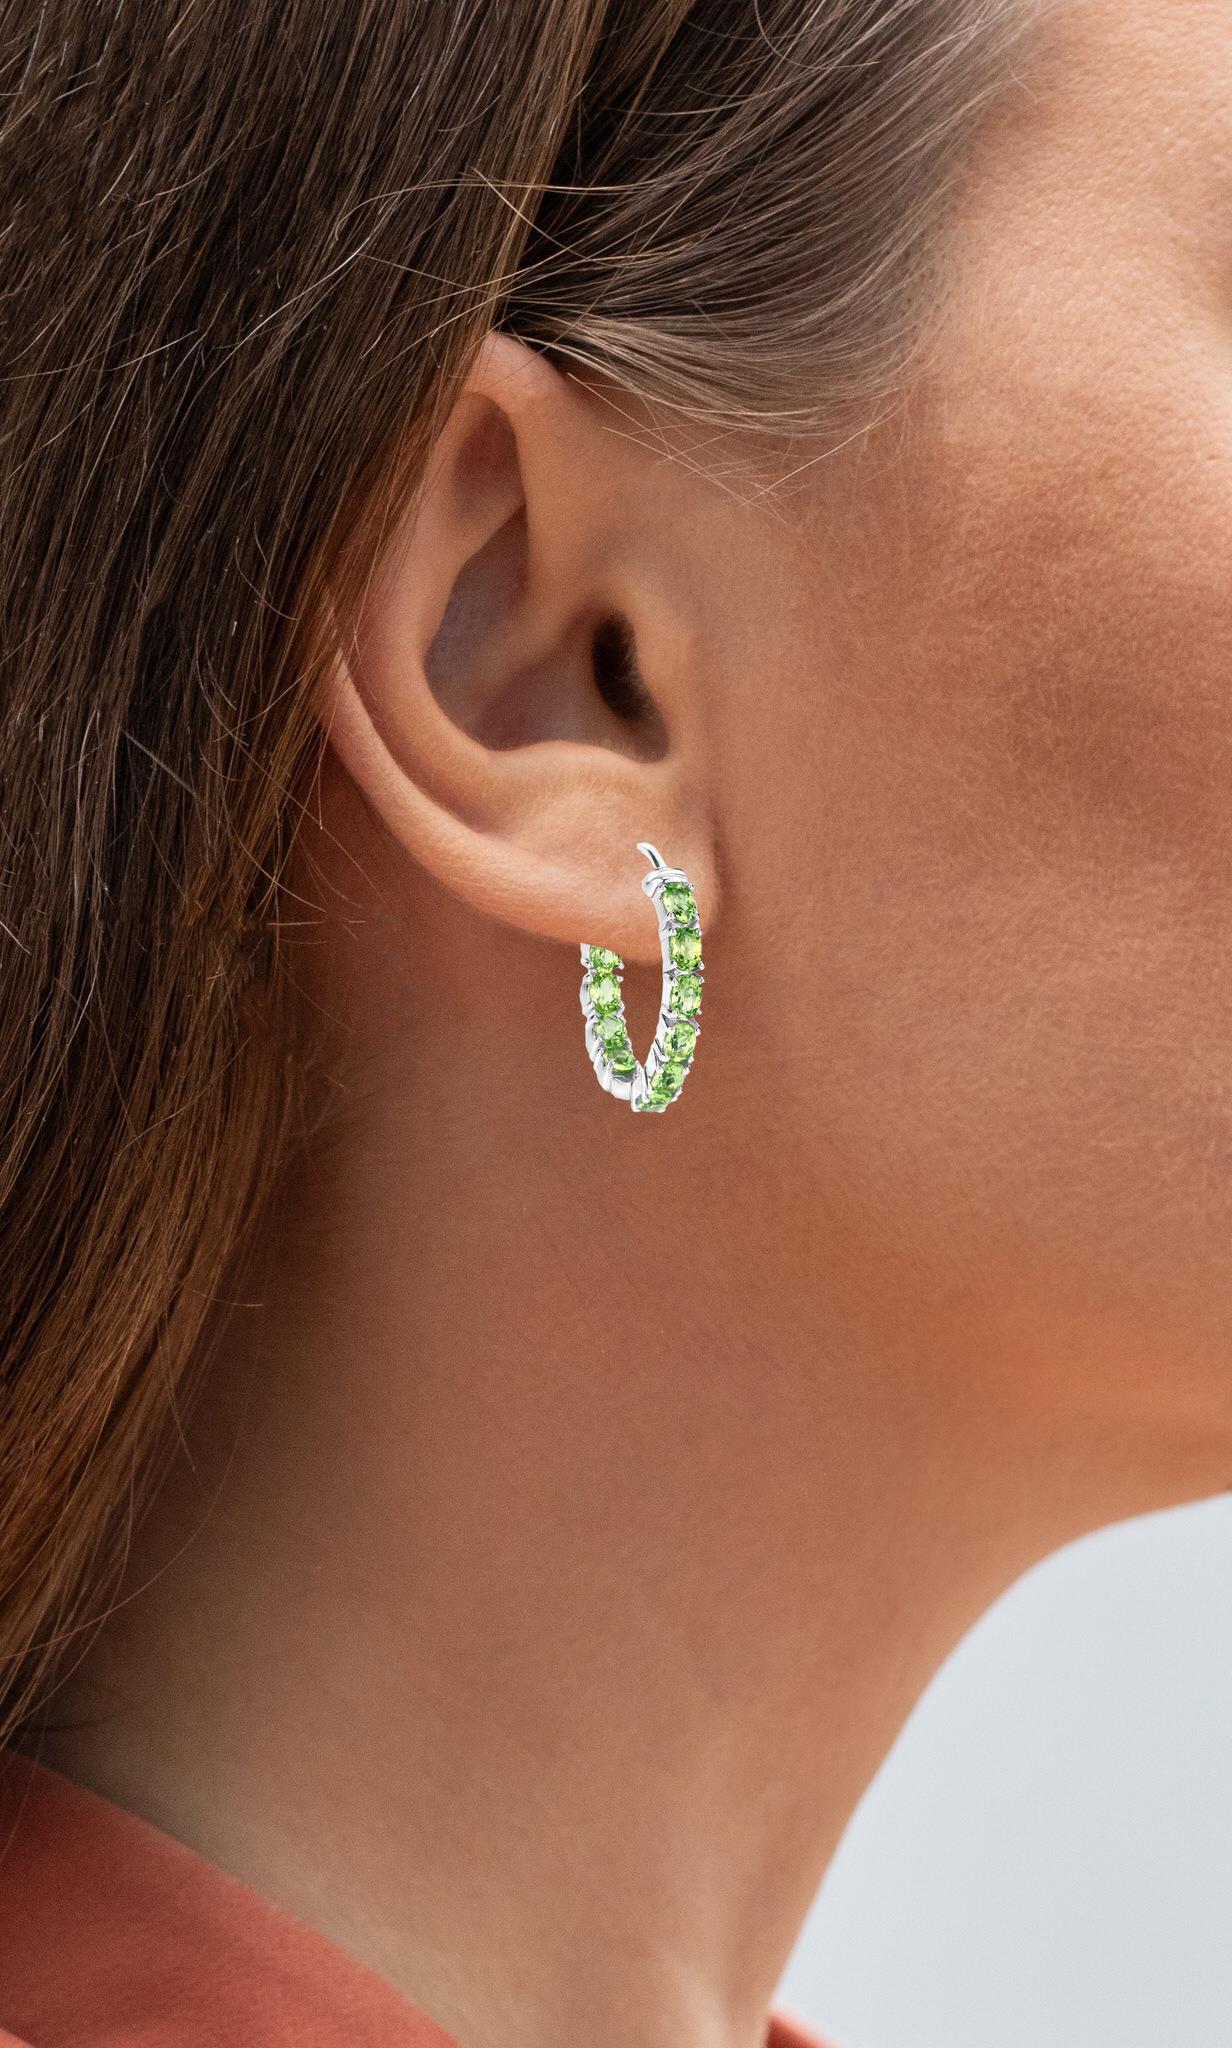 It comes with the Gemological Appraisal by GIA GG/AJP
All Gemstones are Natural
20 Peridots = 3.40 Carats
Metal: Rhodium Plated Sterling Silver
Dimensions: 24.4 x 3.3 mm
